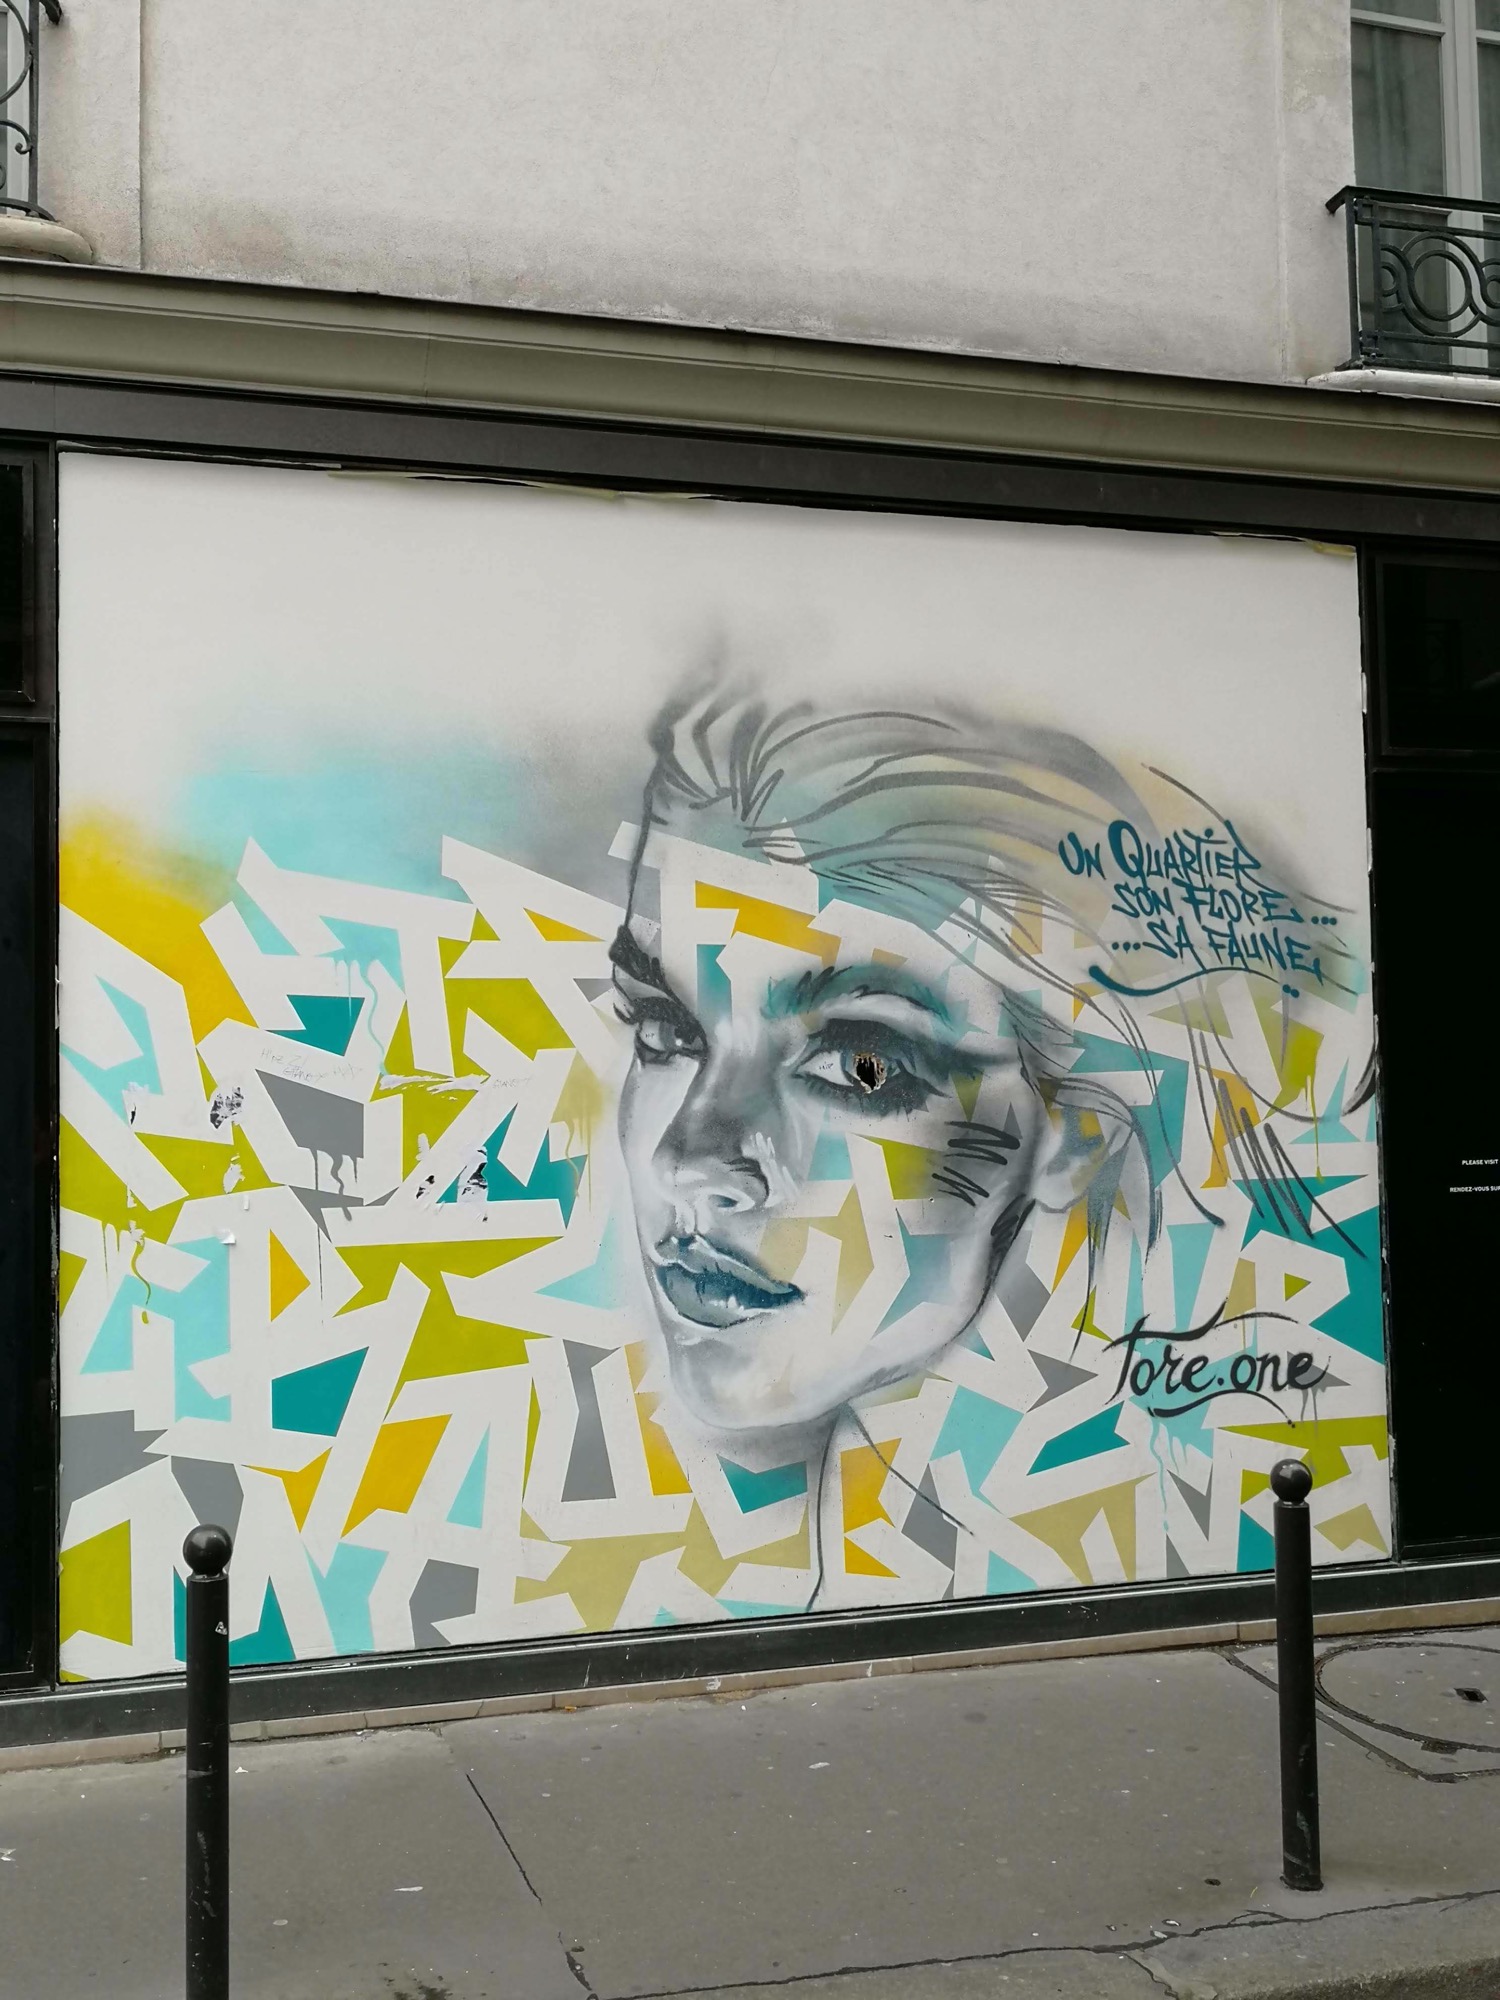 Graffiti 3229  captured by Rabot in Paris France